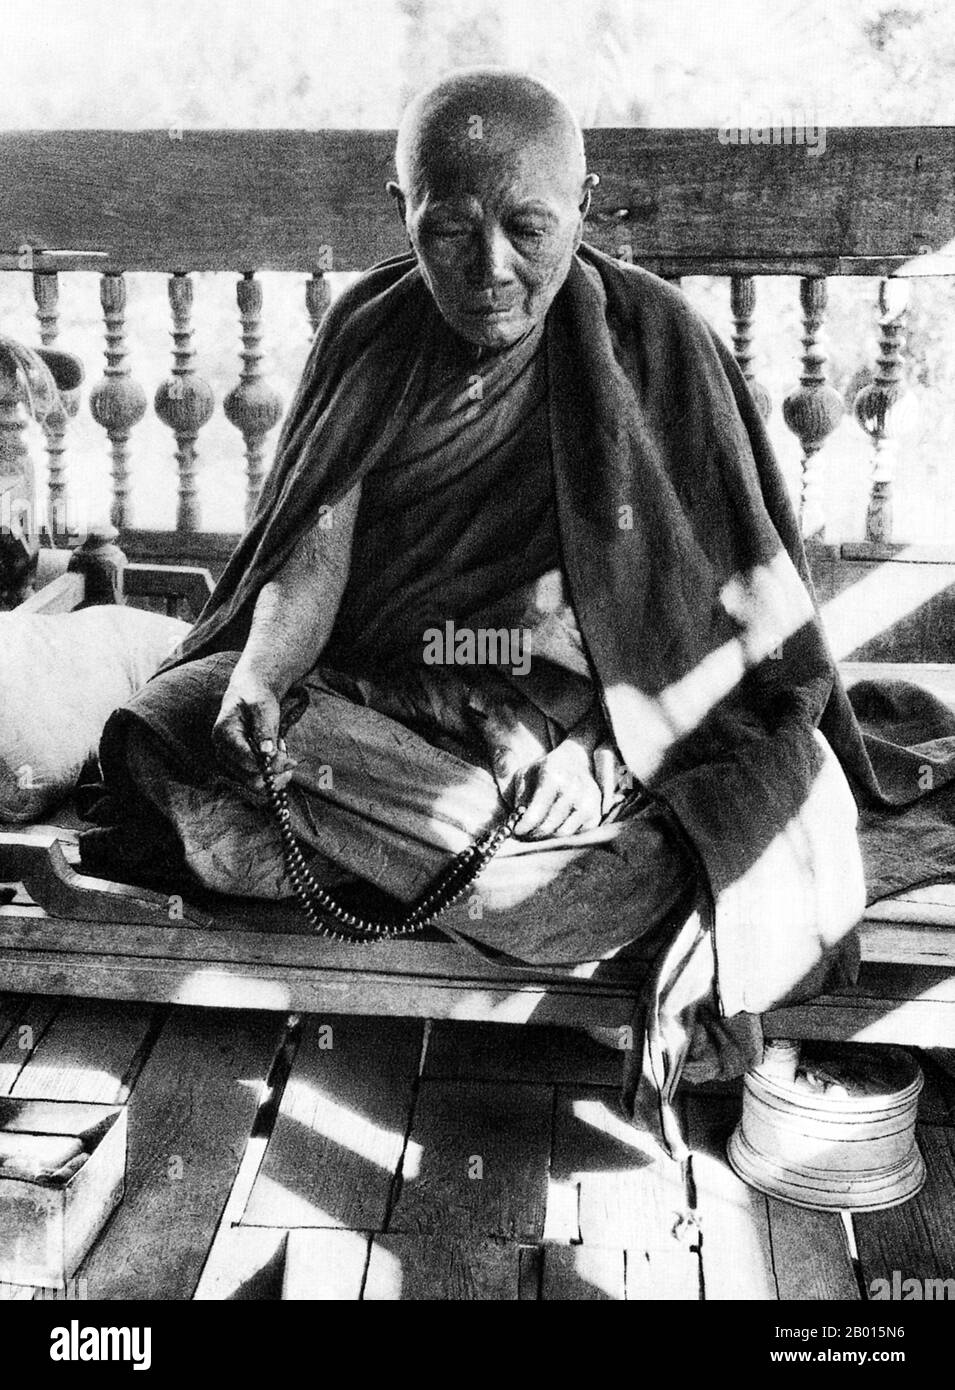 Burma/Myanmar: An old Buddhist monk with prayer beads, c. 1920s.  Legend attributes the first Buddhist doctrine in Burma to 228 BC when Sohn Uttar Sthavira, one of the royal monks to Emperor Ashoka the Great of India, came to the country with other monks and sacred texts. However, the era of Buddhism truly began in the 11th century after King Anawrahta of Pagan (Bagan) was converted to Theravada Buddhism. Today, 89% of the population of Burma is Theravada Buddhist. Stock Photo